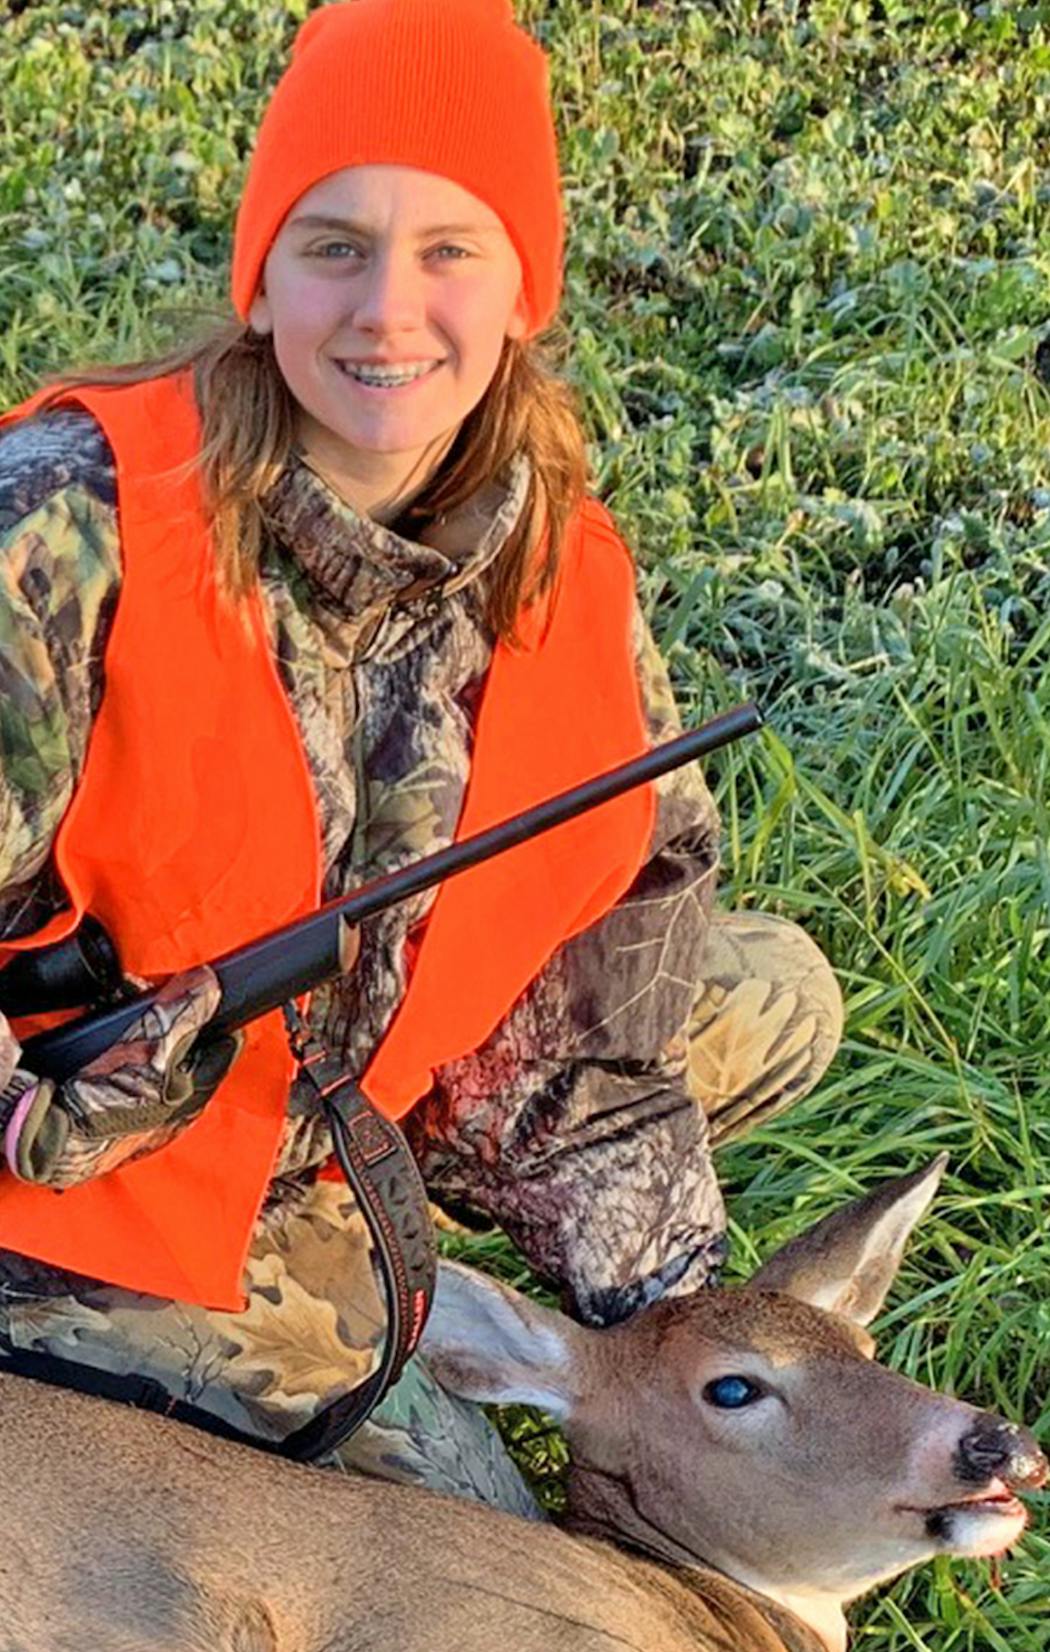 Sienna Tommerdahl, 13, of Ham Lake, made her first deer hunt in Douglas County during the youth season. She and her mother, Kelsey Froemming, waited a long time on their stand before Sienna exclaimed, “Mom! There are three deer right behind us!” Those deer ran off. Later, however, Sienna dropped a doe at 180 yards. “What a great shot!’’ her mom said.